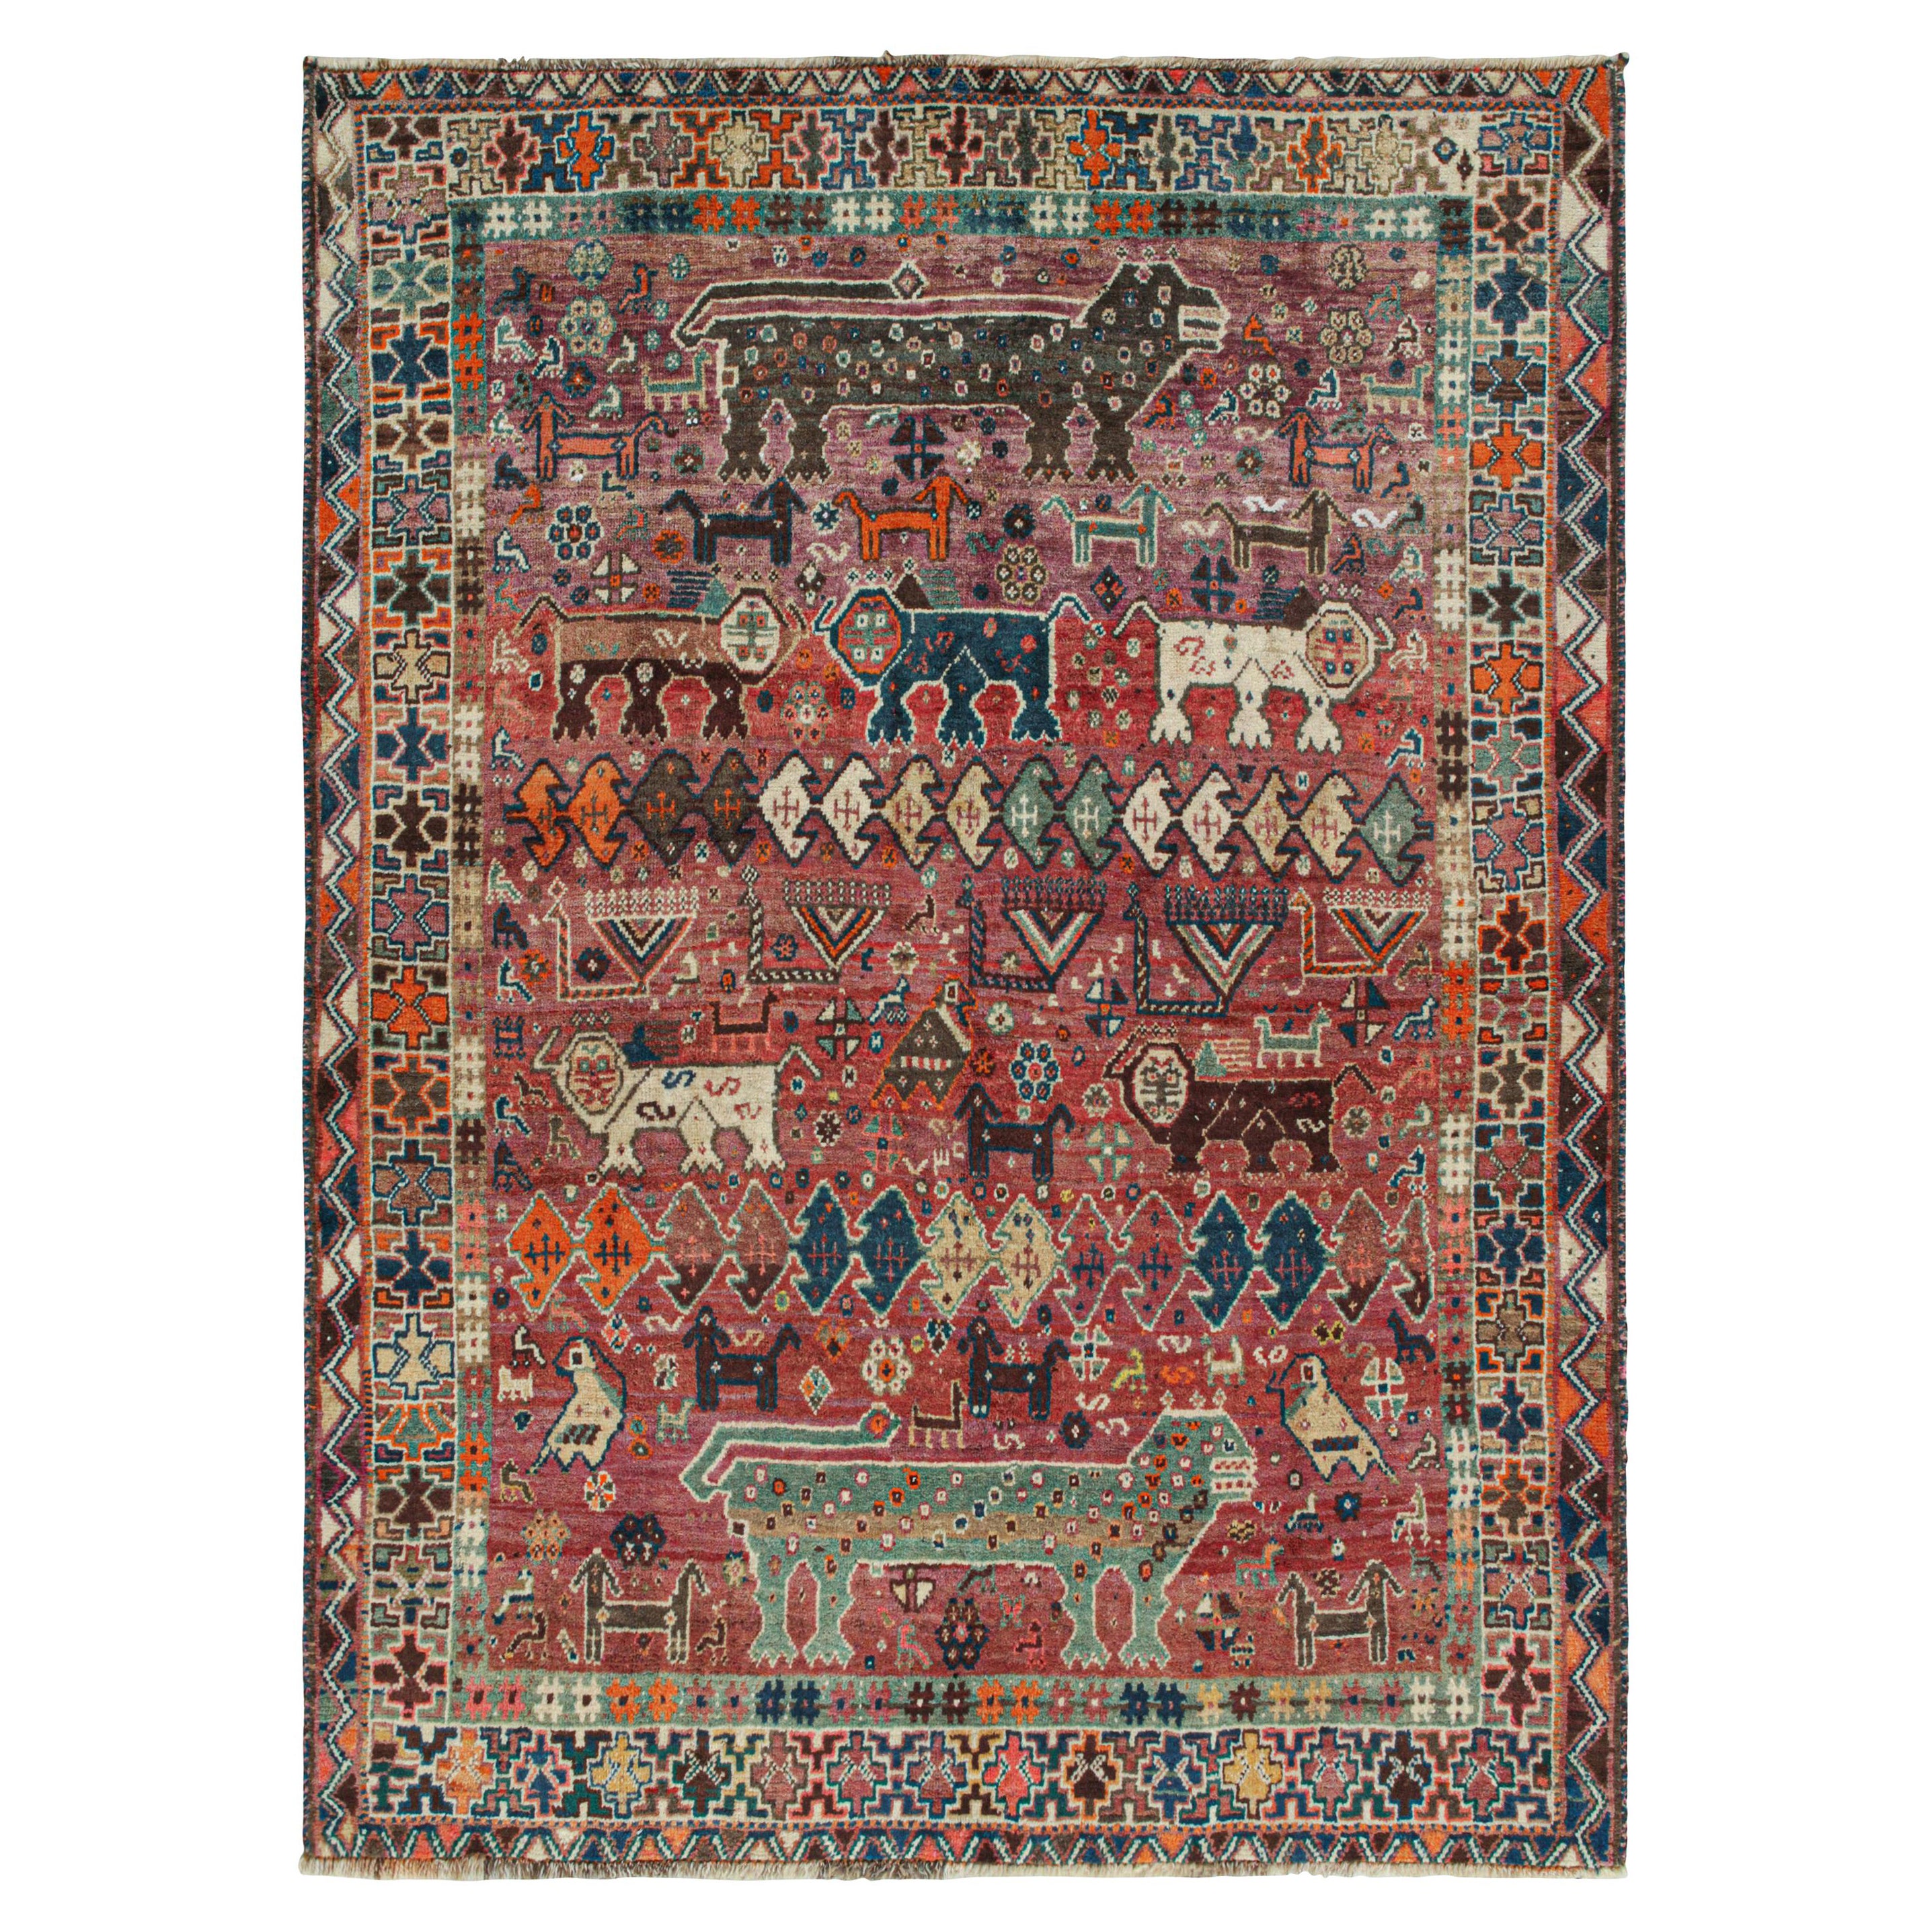 Vintage Qashqai Persian Gabbeh Rug with Animal Pictorials, from Rug & Kilim